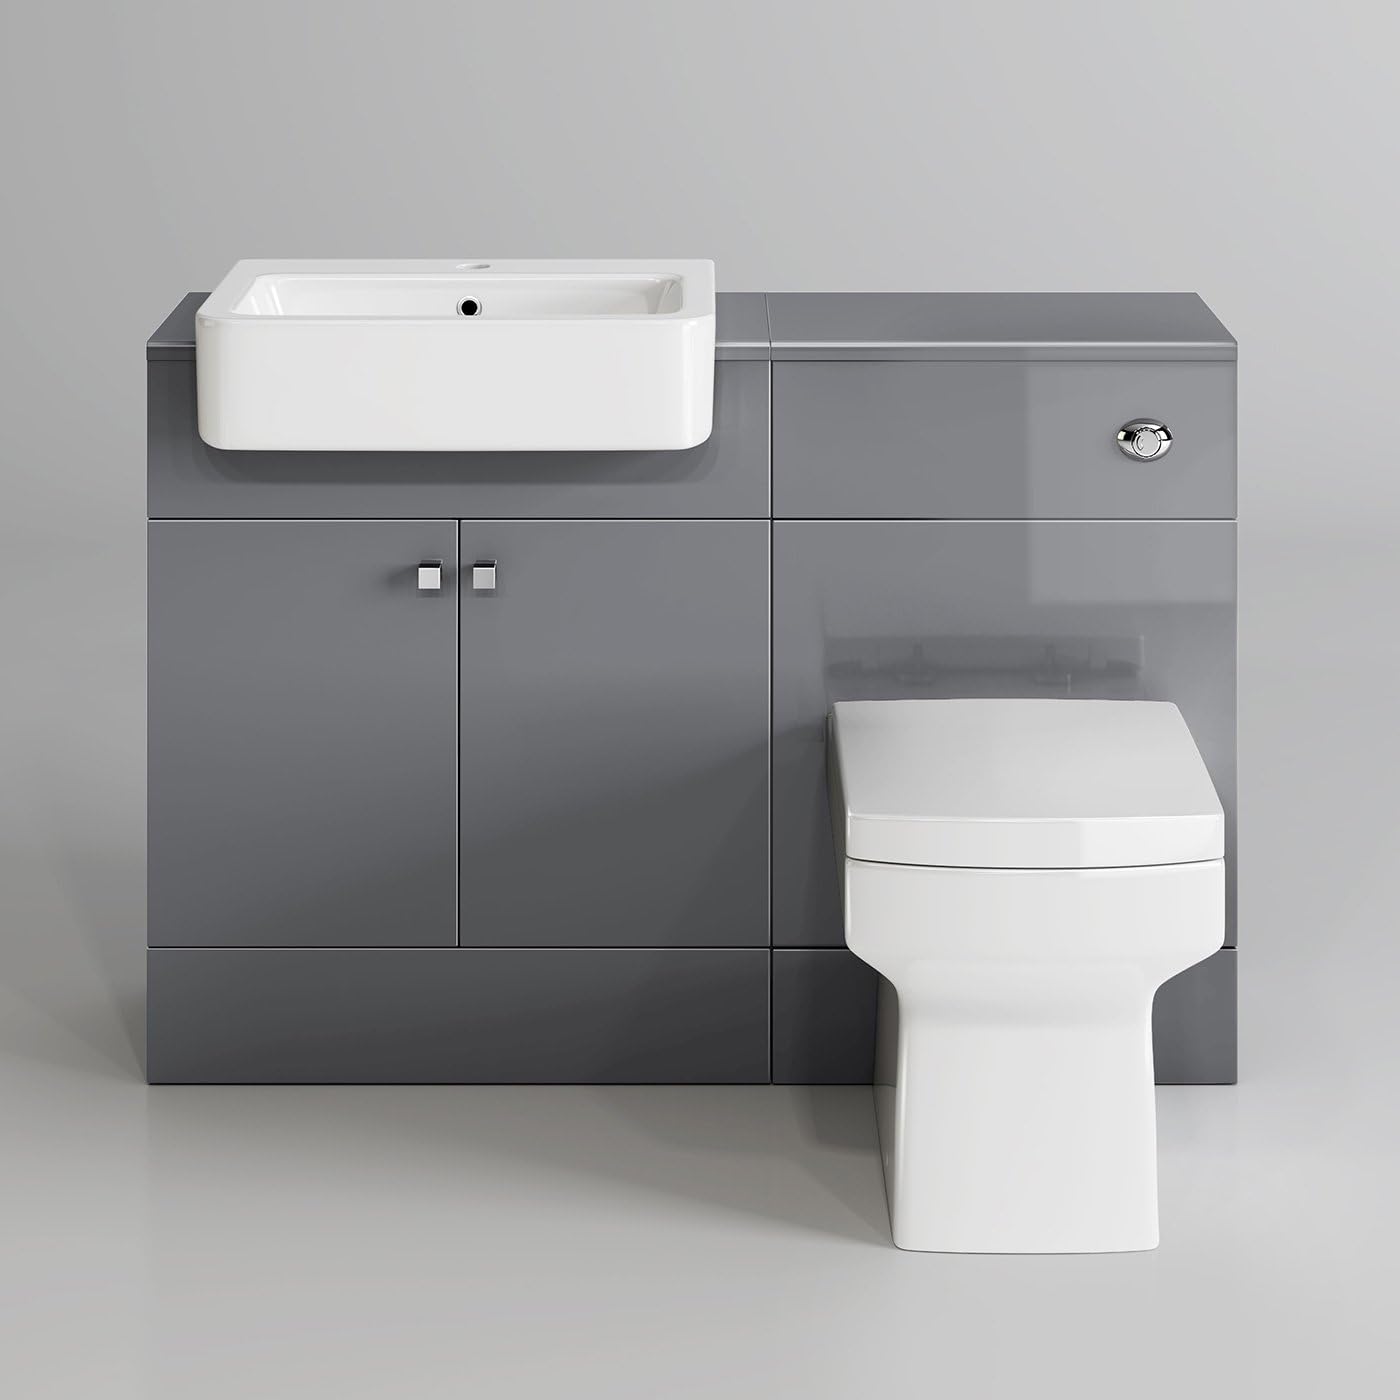 A modern bathroom with a white toilet, sink, and bathtub. The walls are tiled in a light gray color.